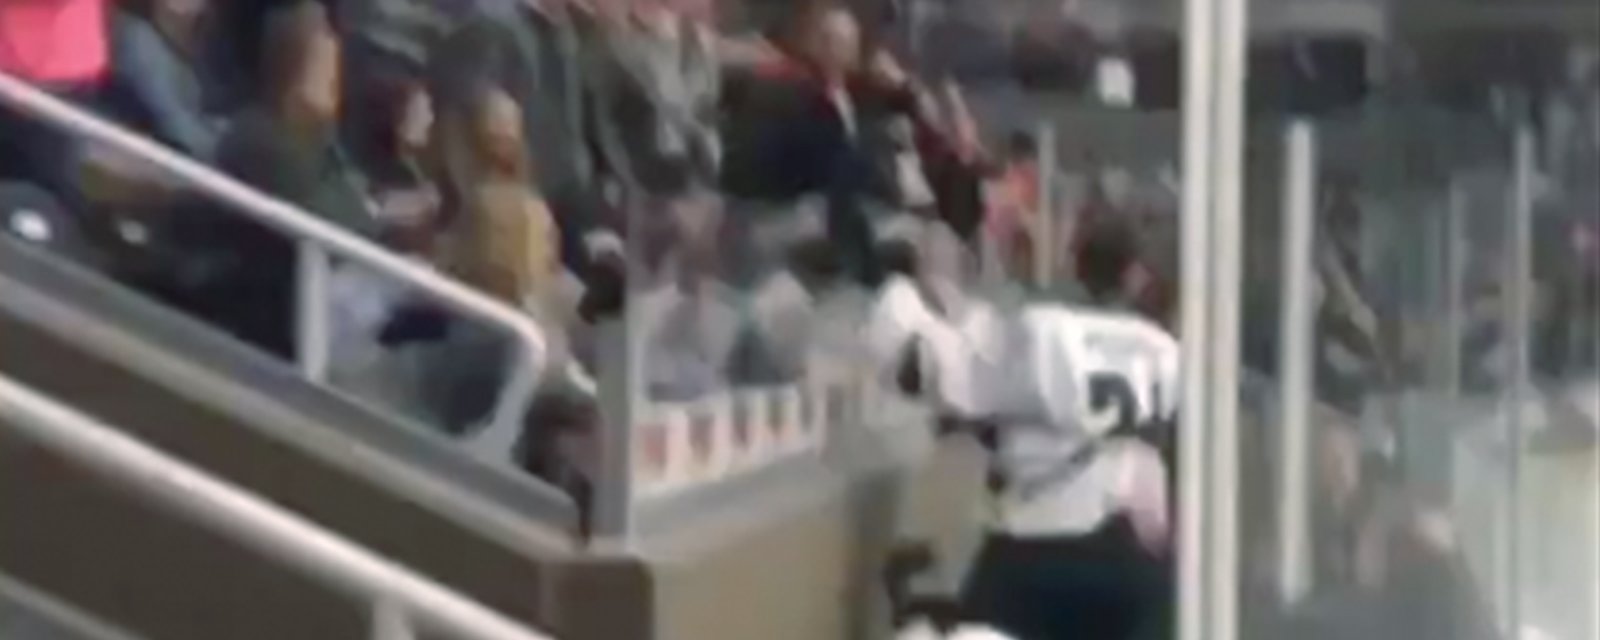 Flames prospect Popisil climbs the glass and tries to fight a fan